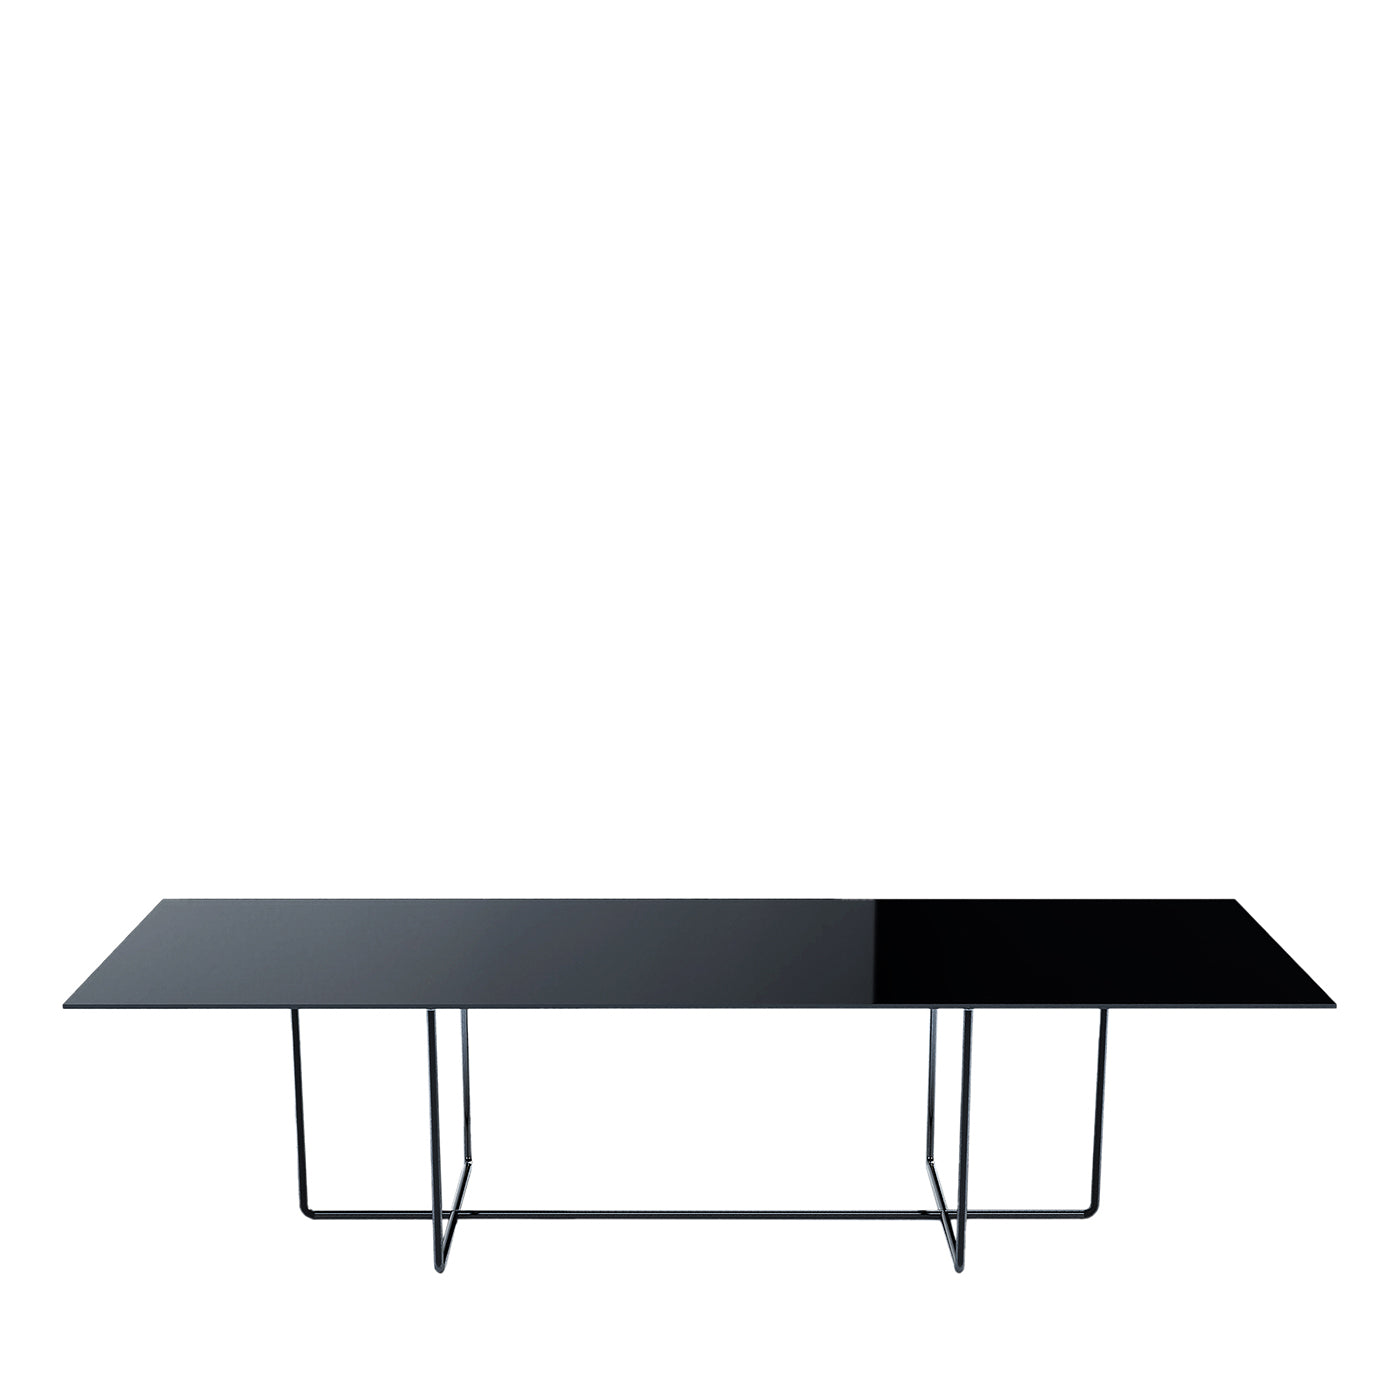 002.09 XP 260 Glass Dining Table - Main view